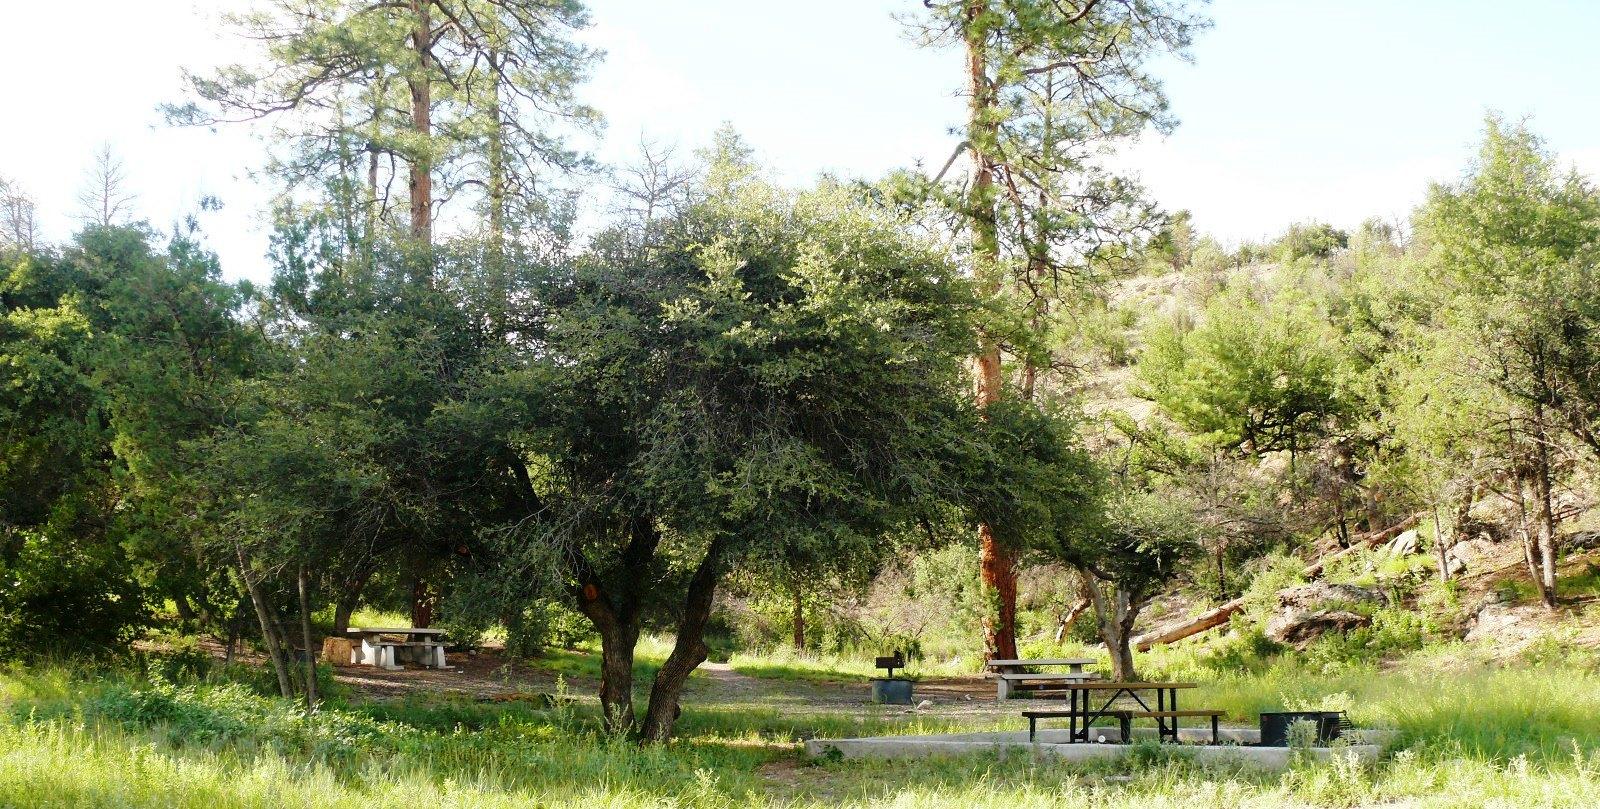 trees and picnic table